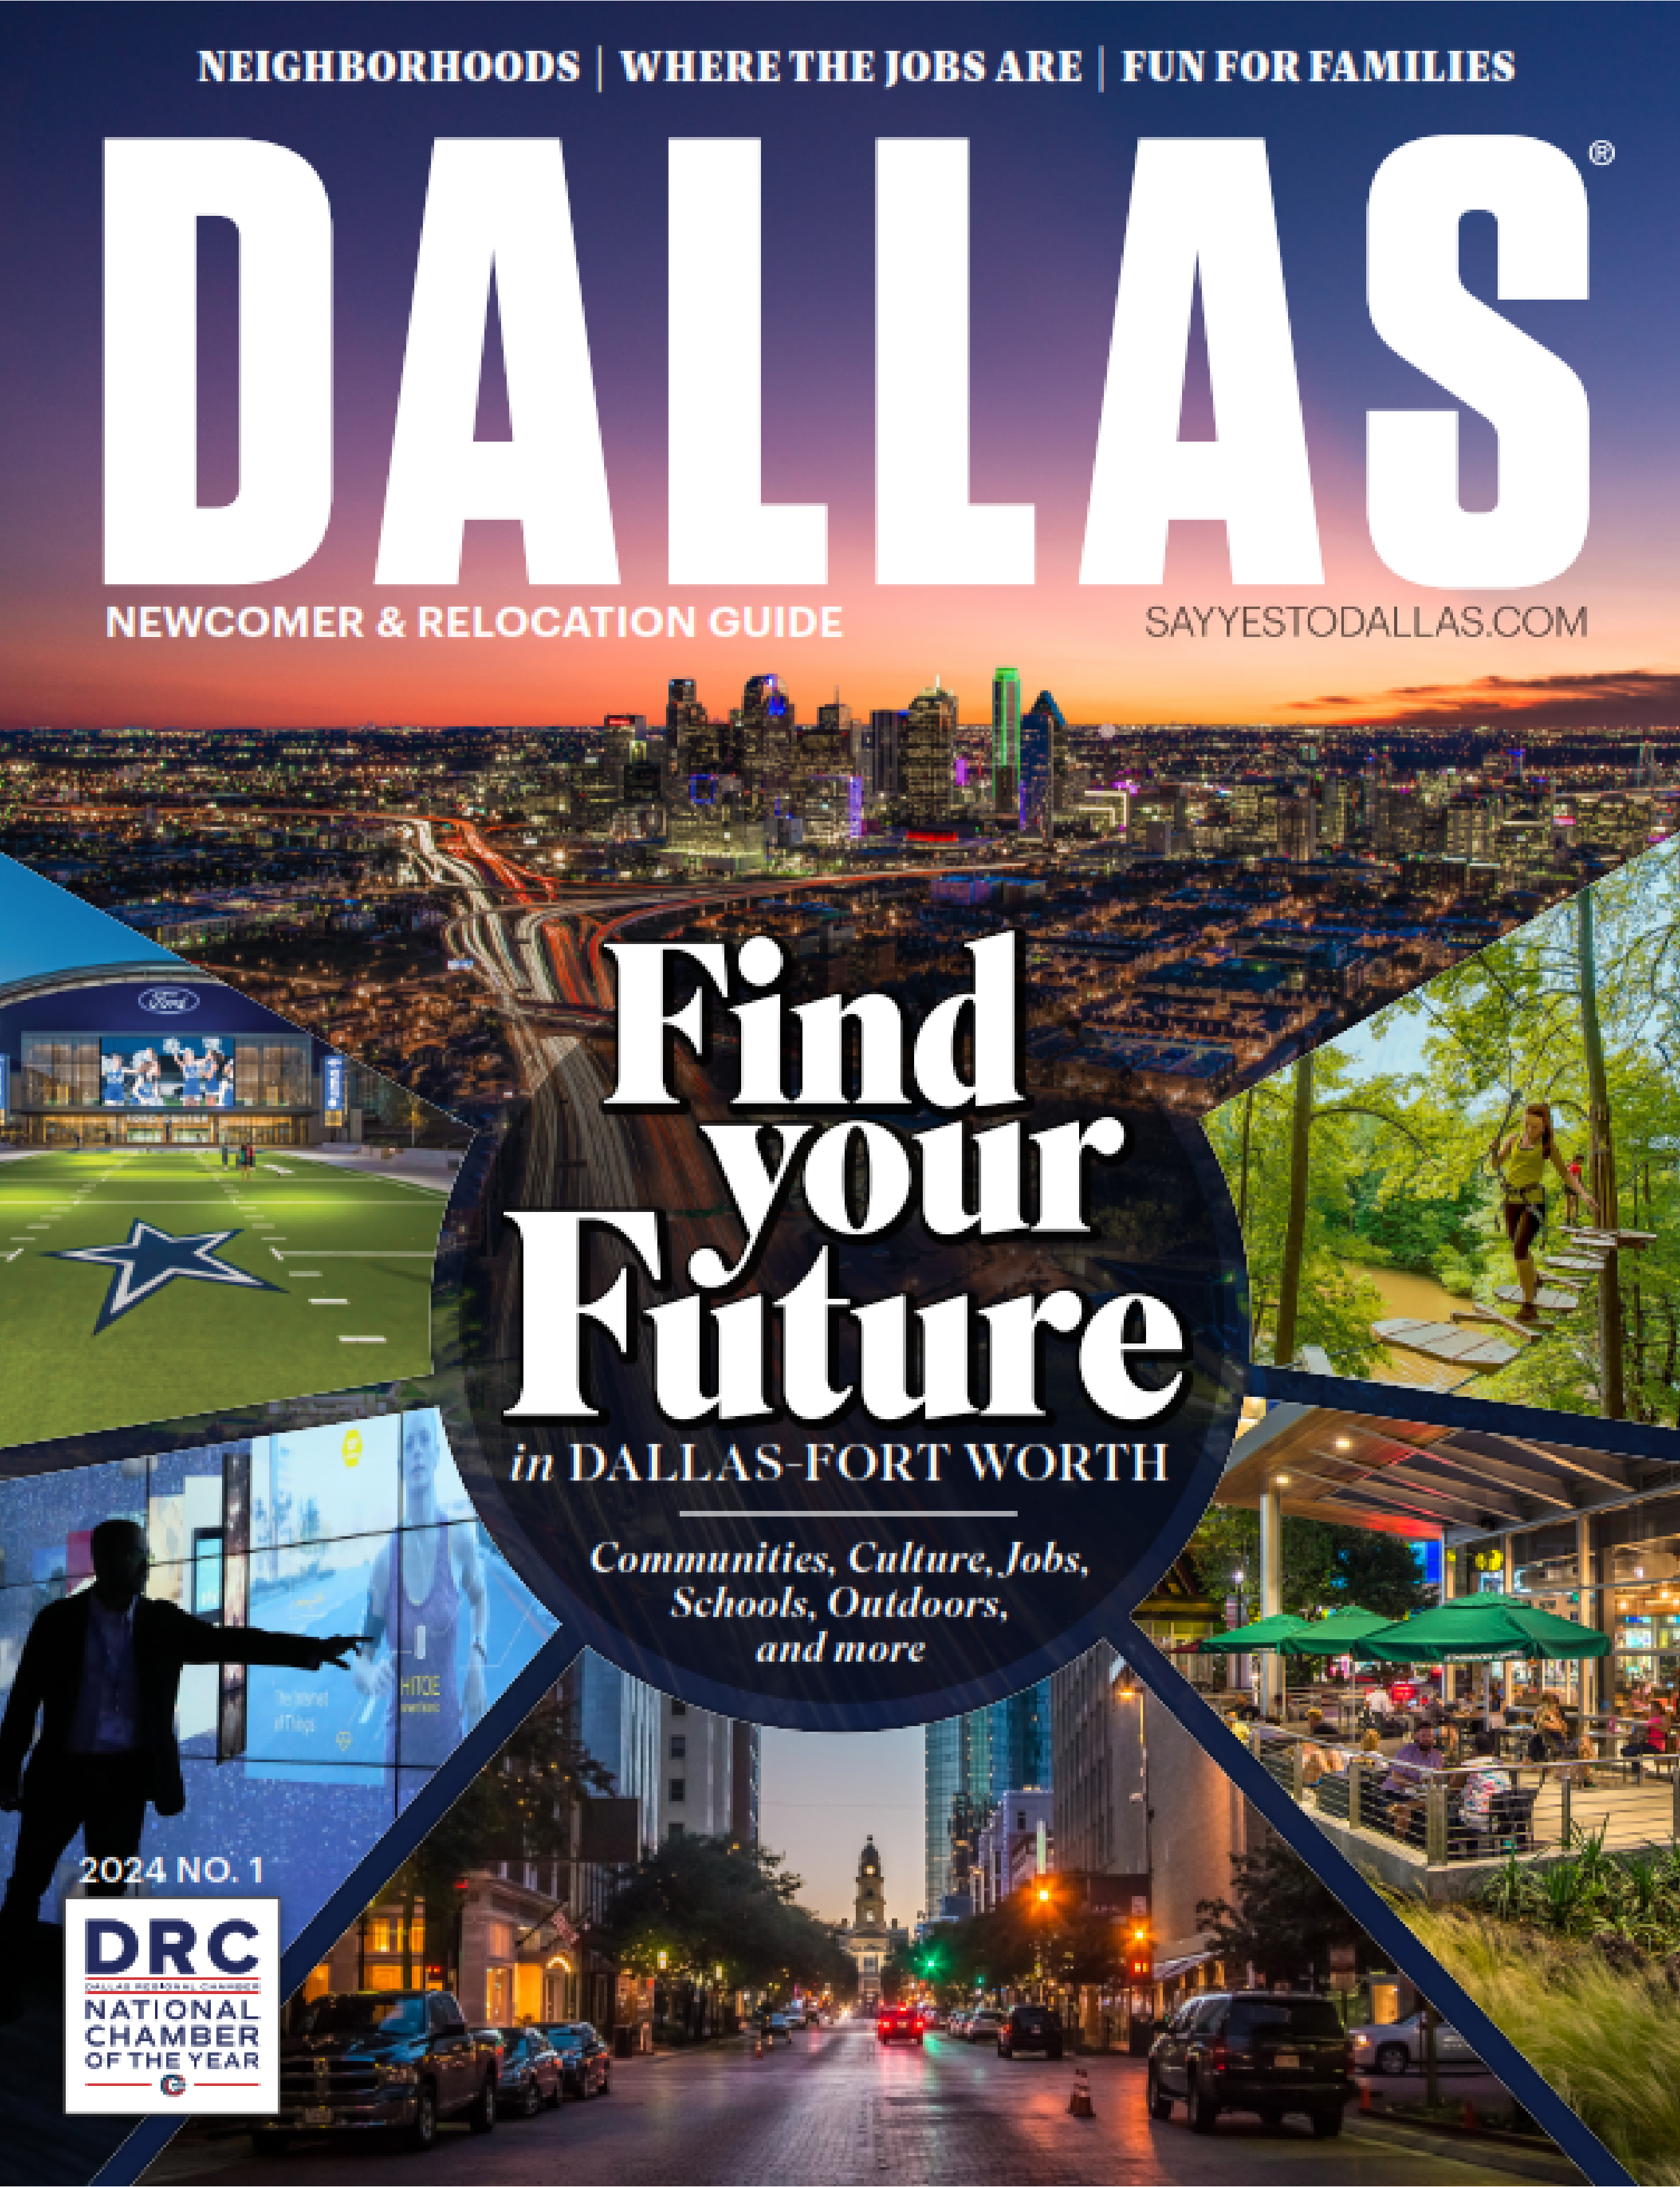 How Dallas-Fort Worth is poised to dominate America's heartland